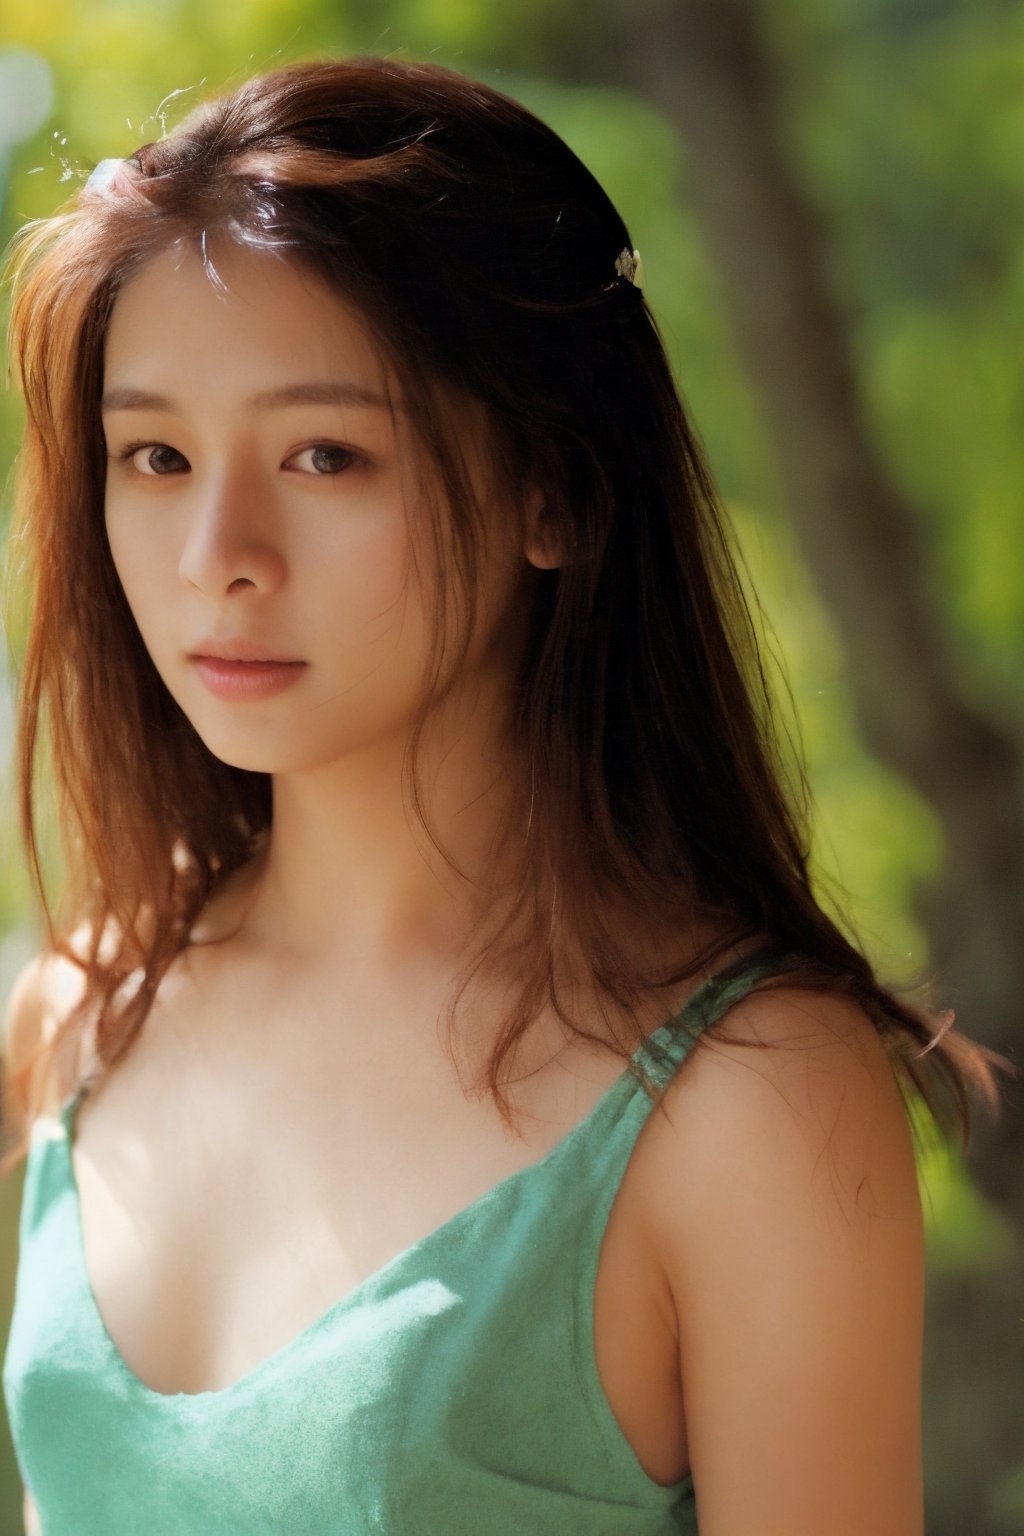 photo of a 25-year-old girl, pale skin, benefits of Samsung S3 Ultra photo features